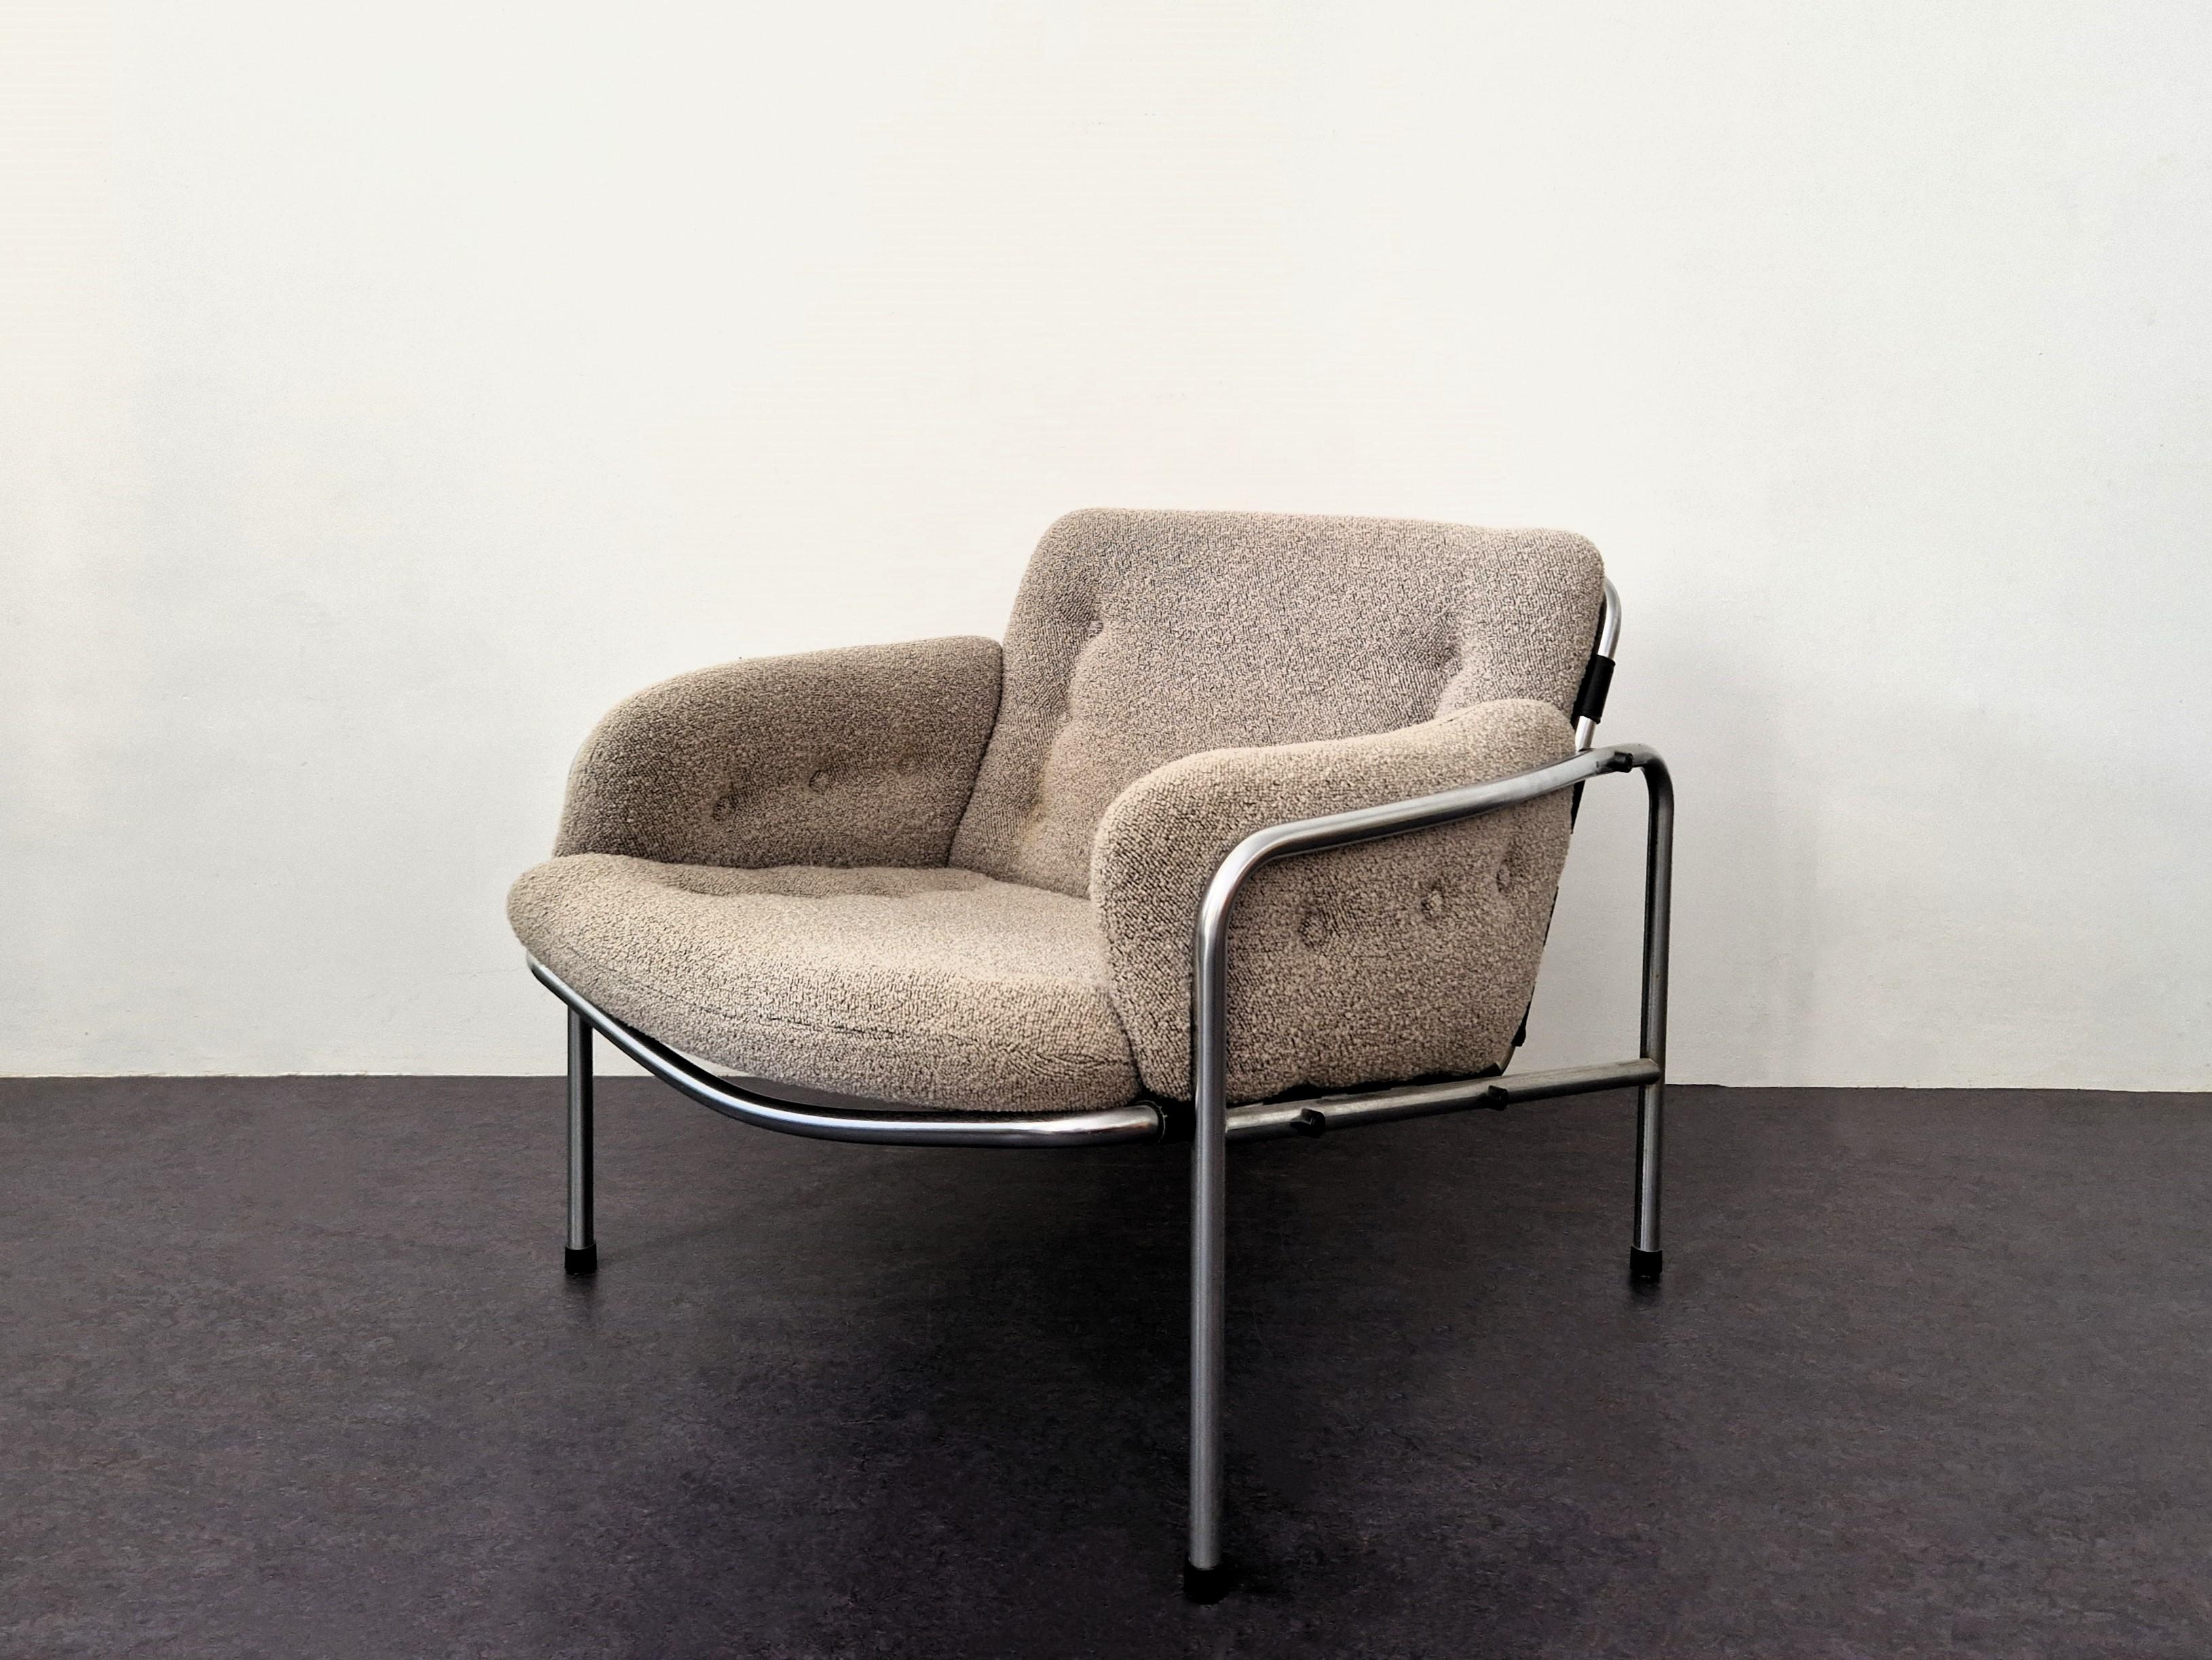 This model SZ-08 lounge chair was designed by Martin Visser for 't Spectrum in 1969 (collection 1969-1974). It is part of the Osaka series that was exhibited at the World Fair in Japan (Osaka) in 1972. This single chair is therefore also known as